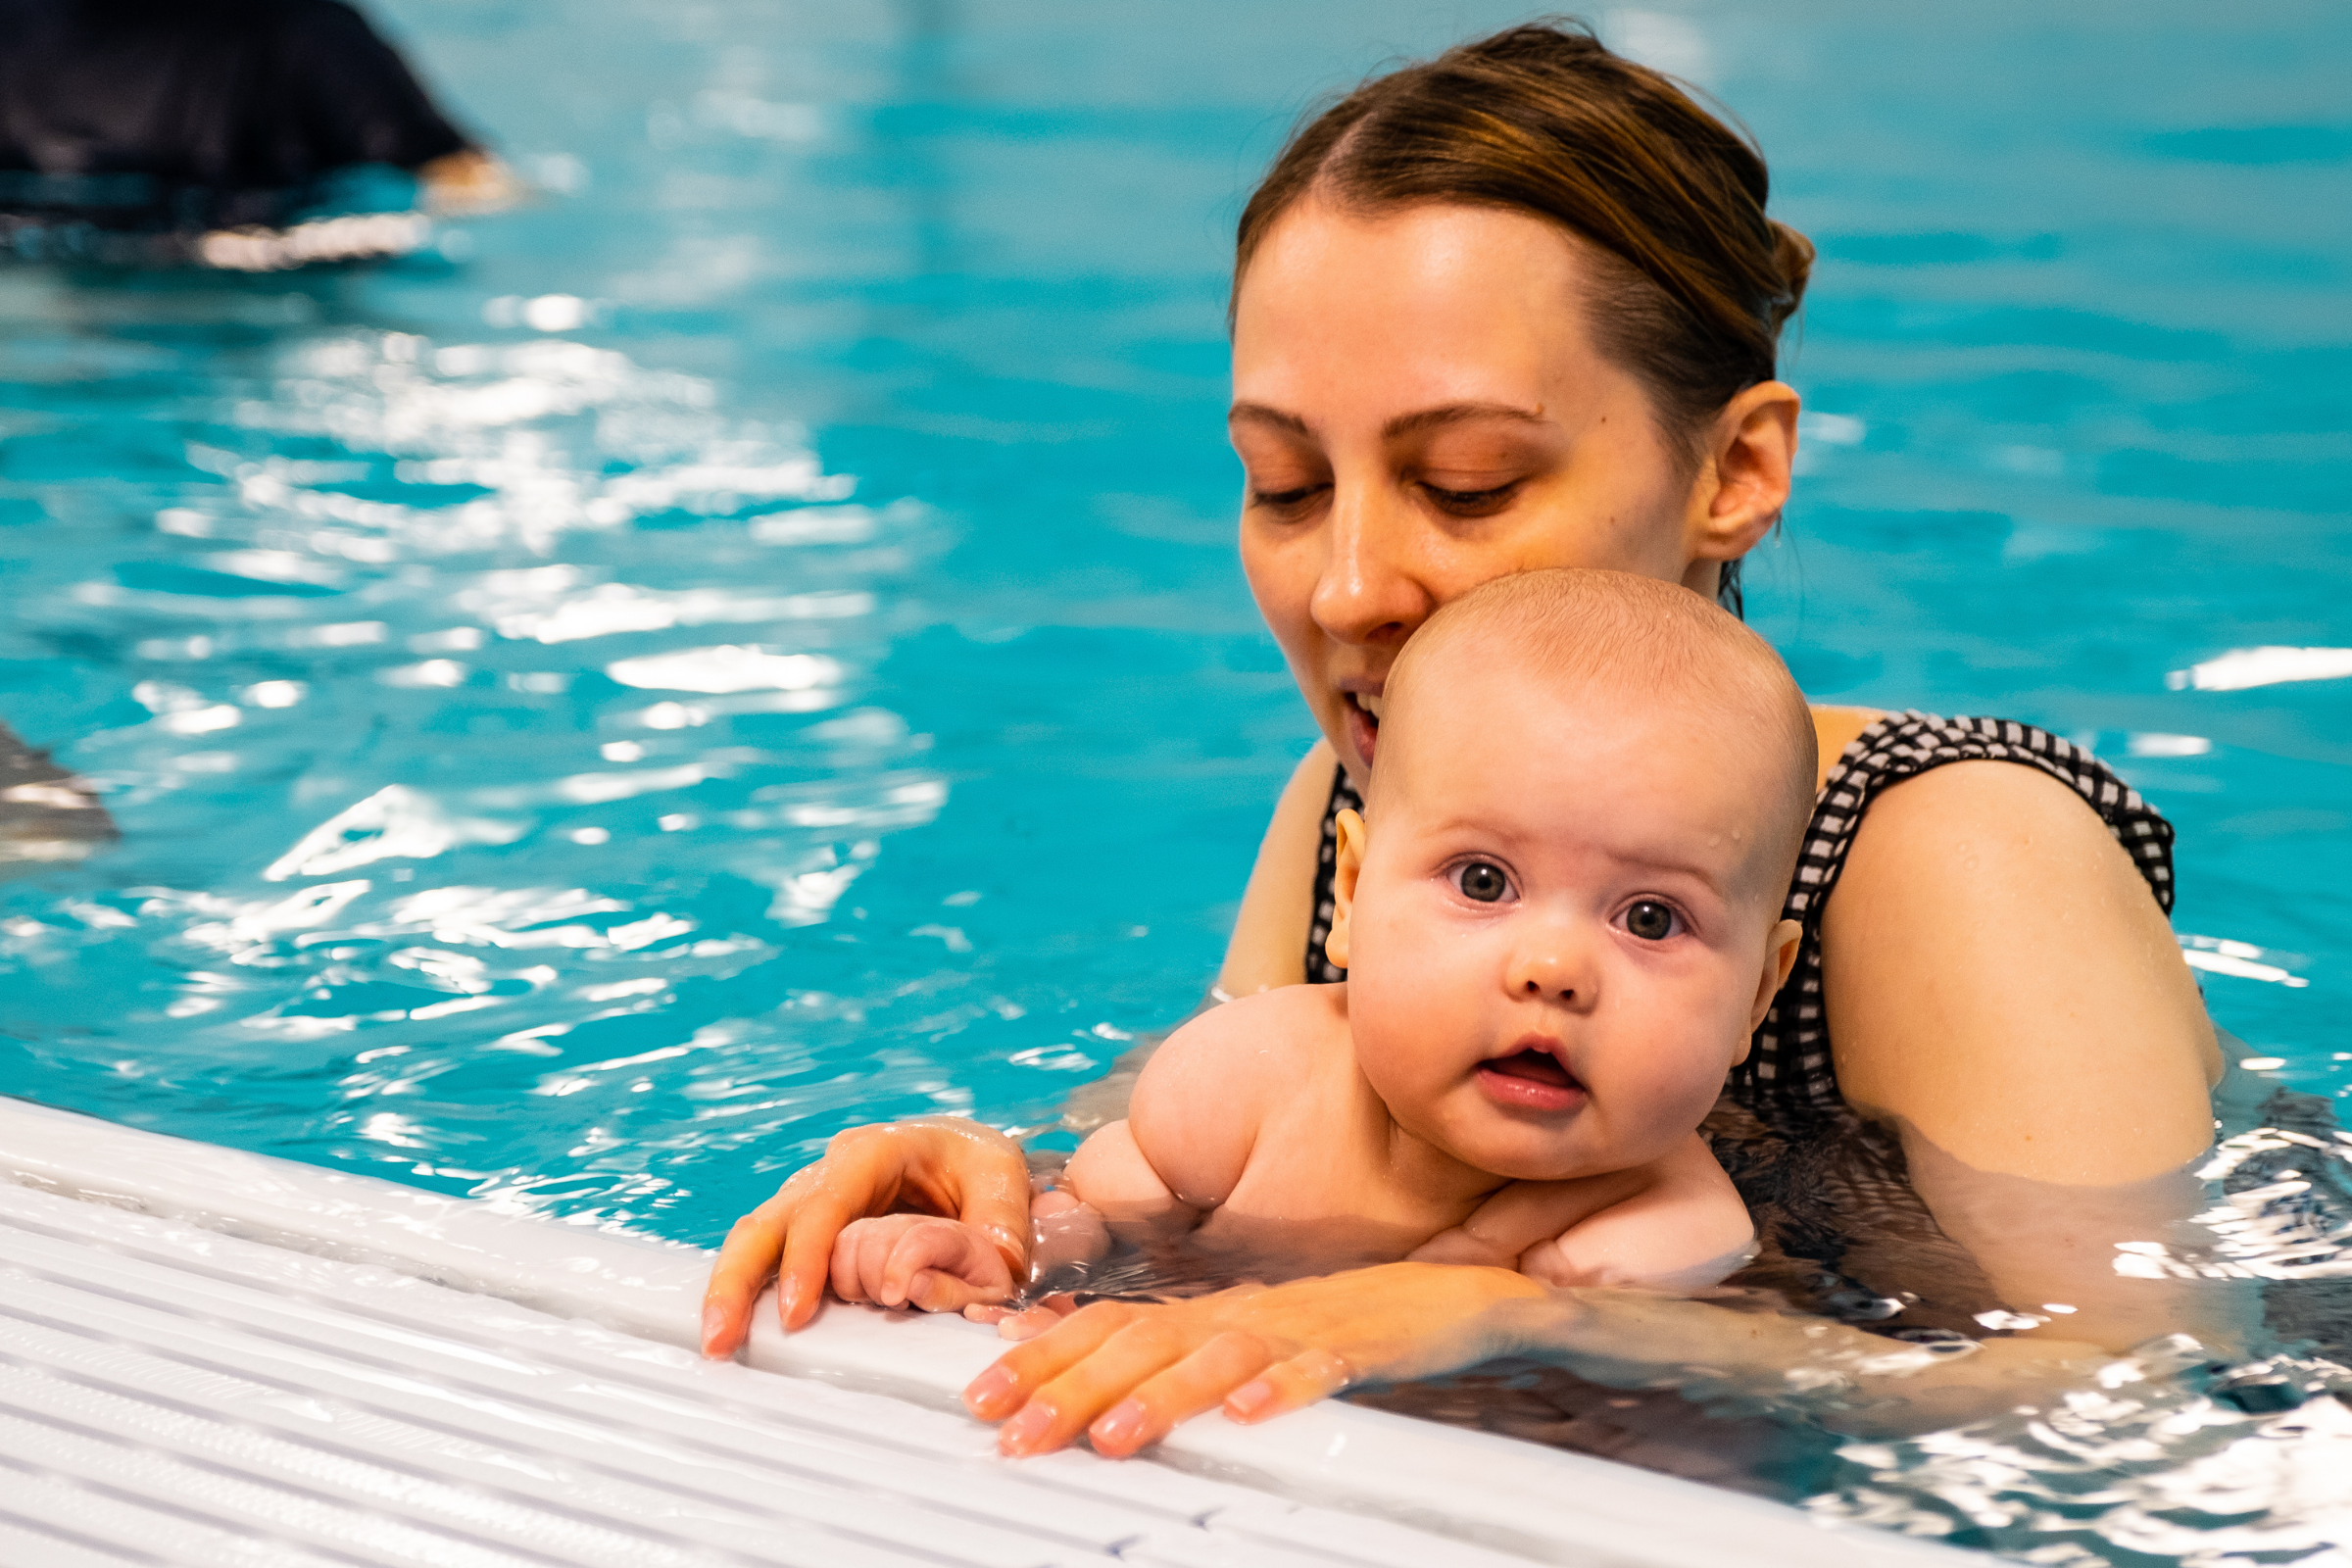 A mum helps a baby to hold on to the side of the pool during a baby swimming lesson